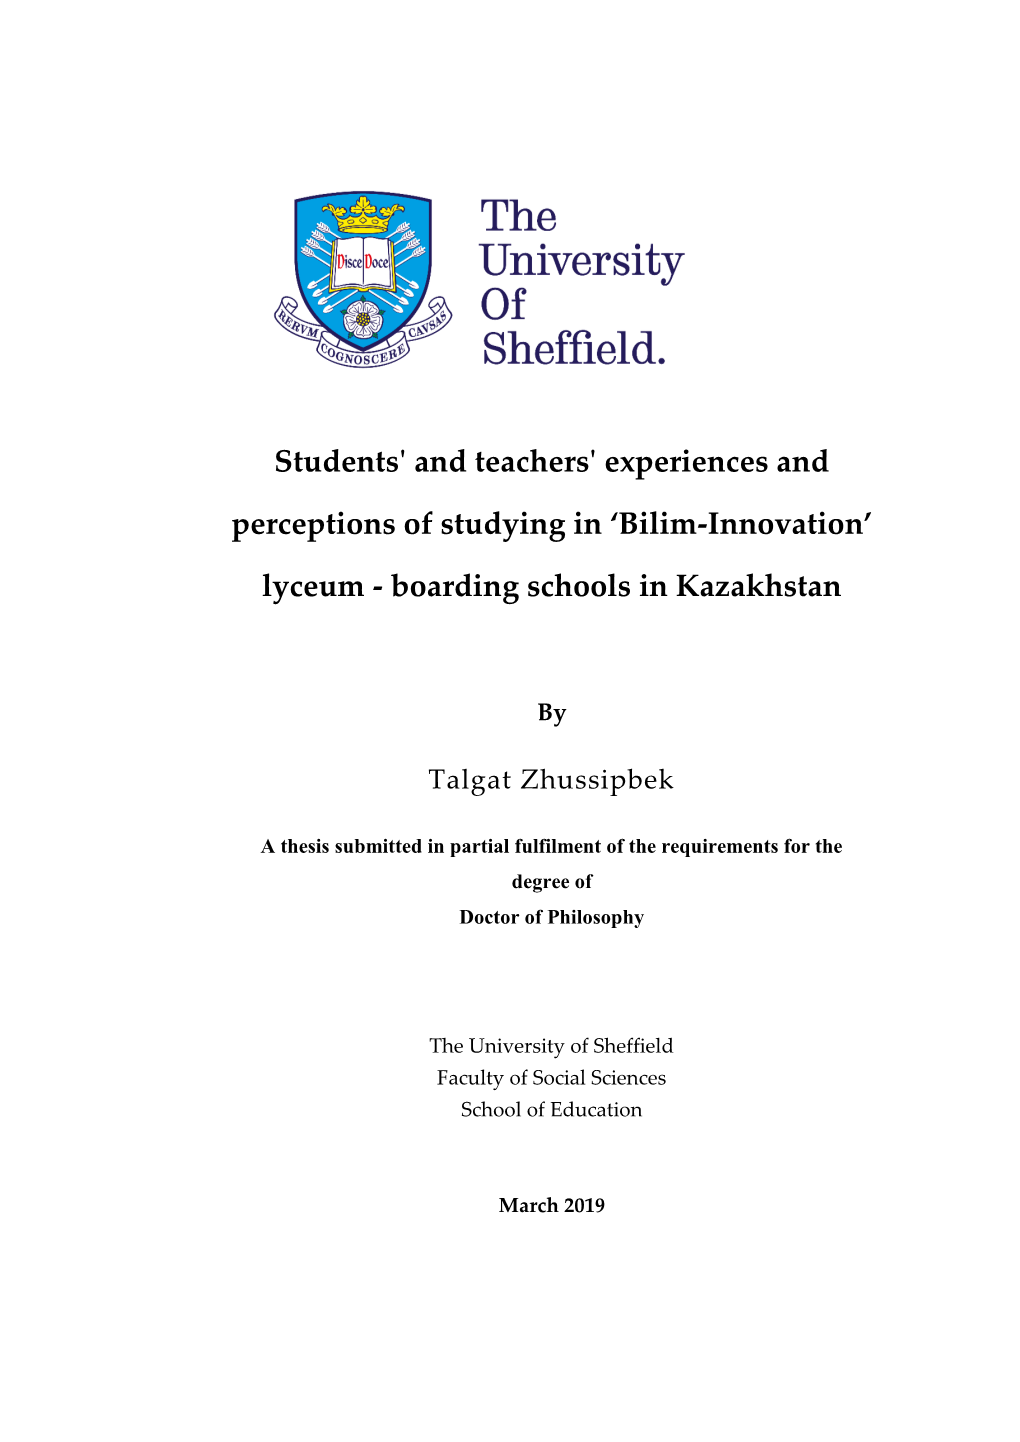 Students' and Teachers' Experiences and Perceptions of Studying in Bils